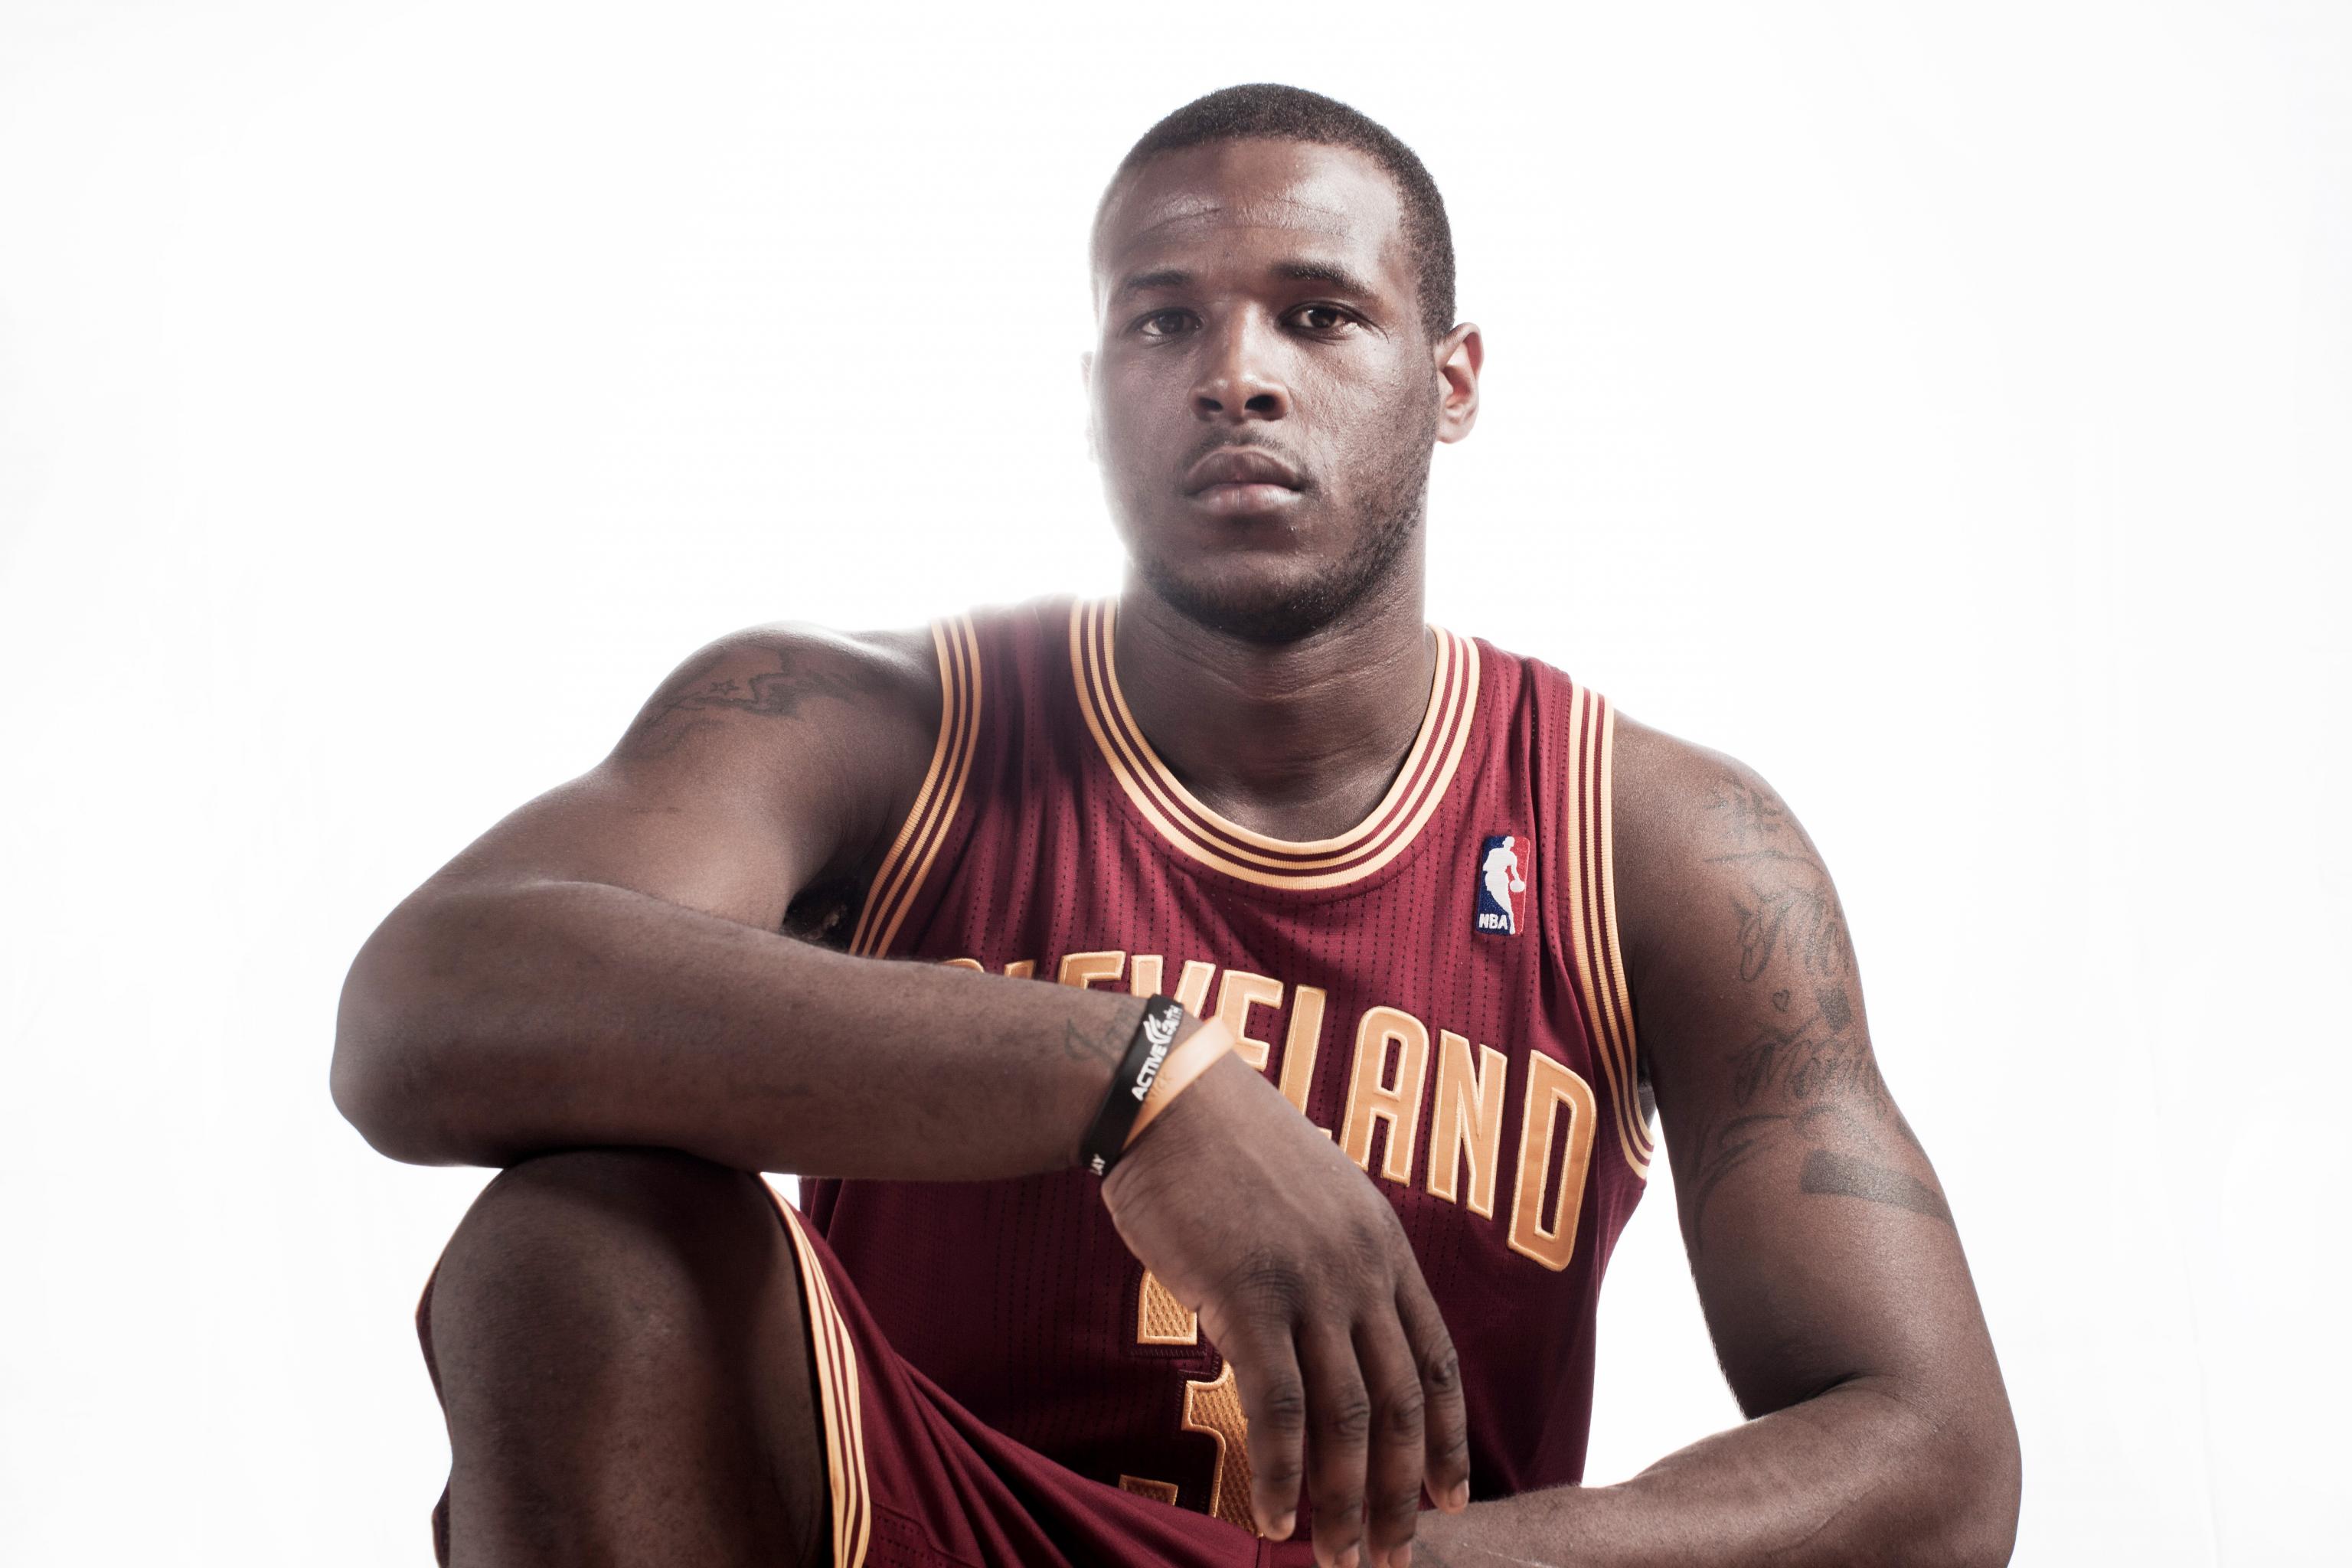 Report: Cavs' Dion Waiters fasted, cut carbs to drop 12 pounds